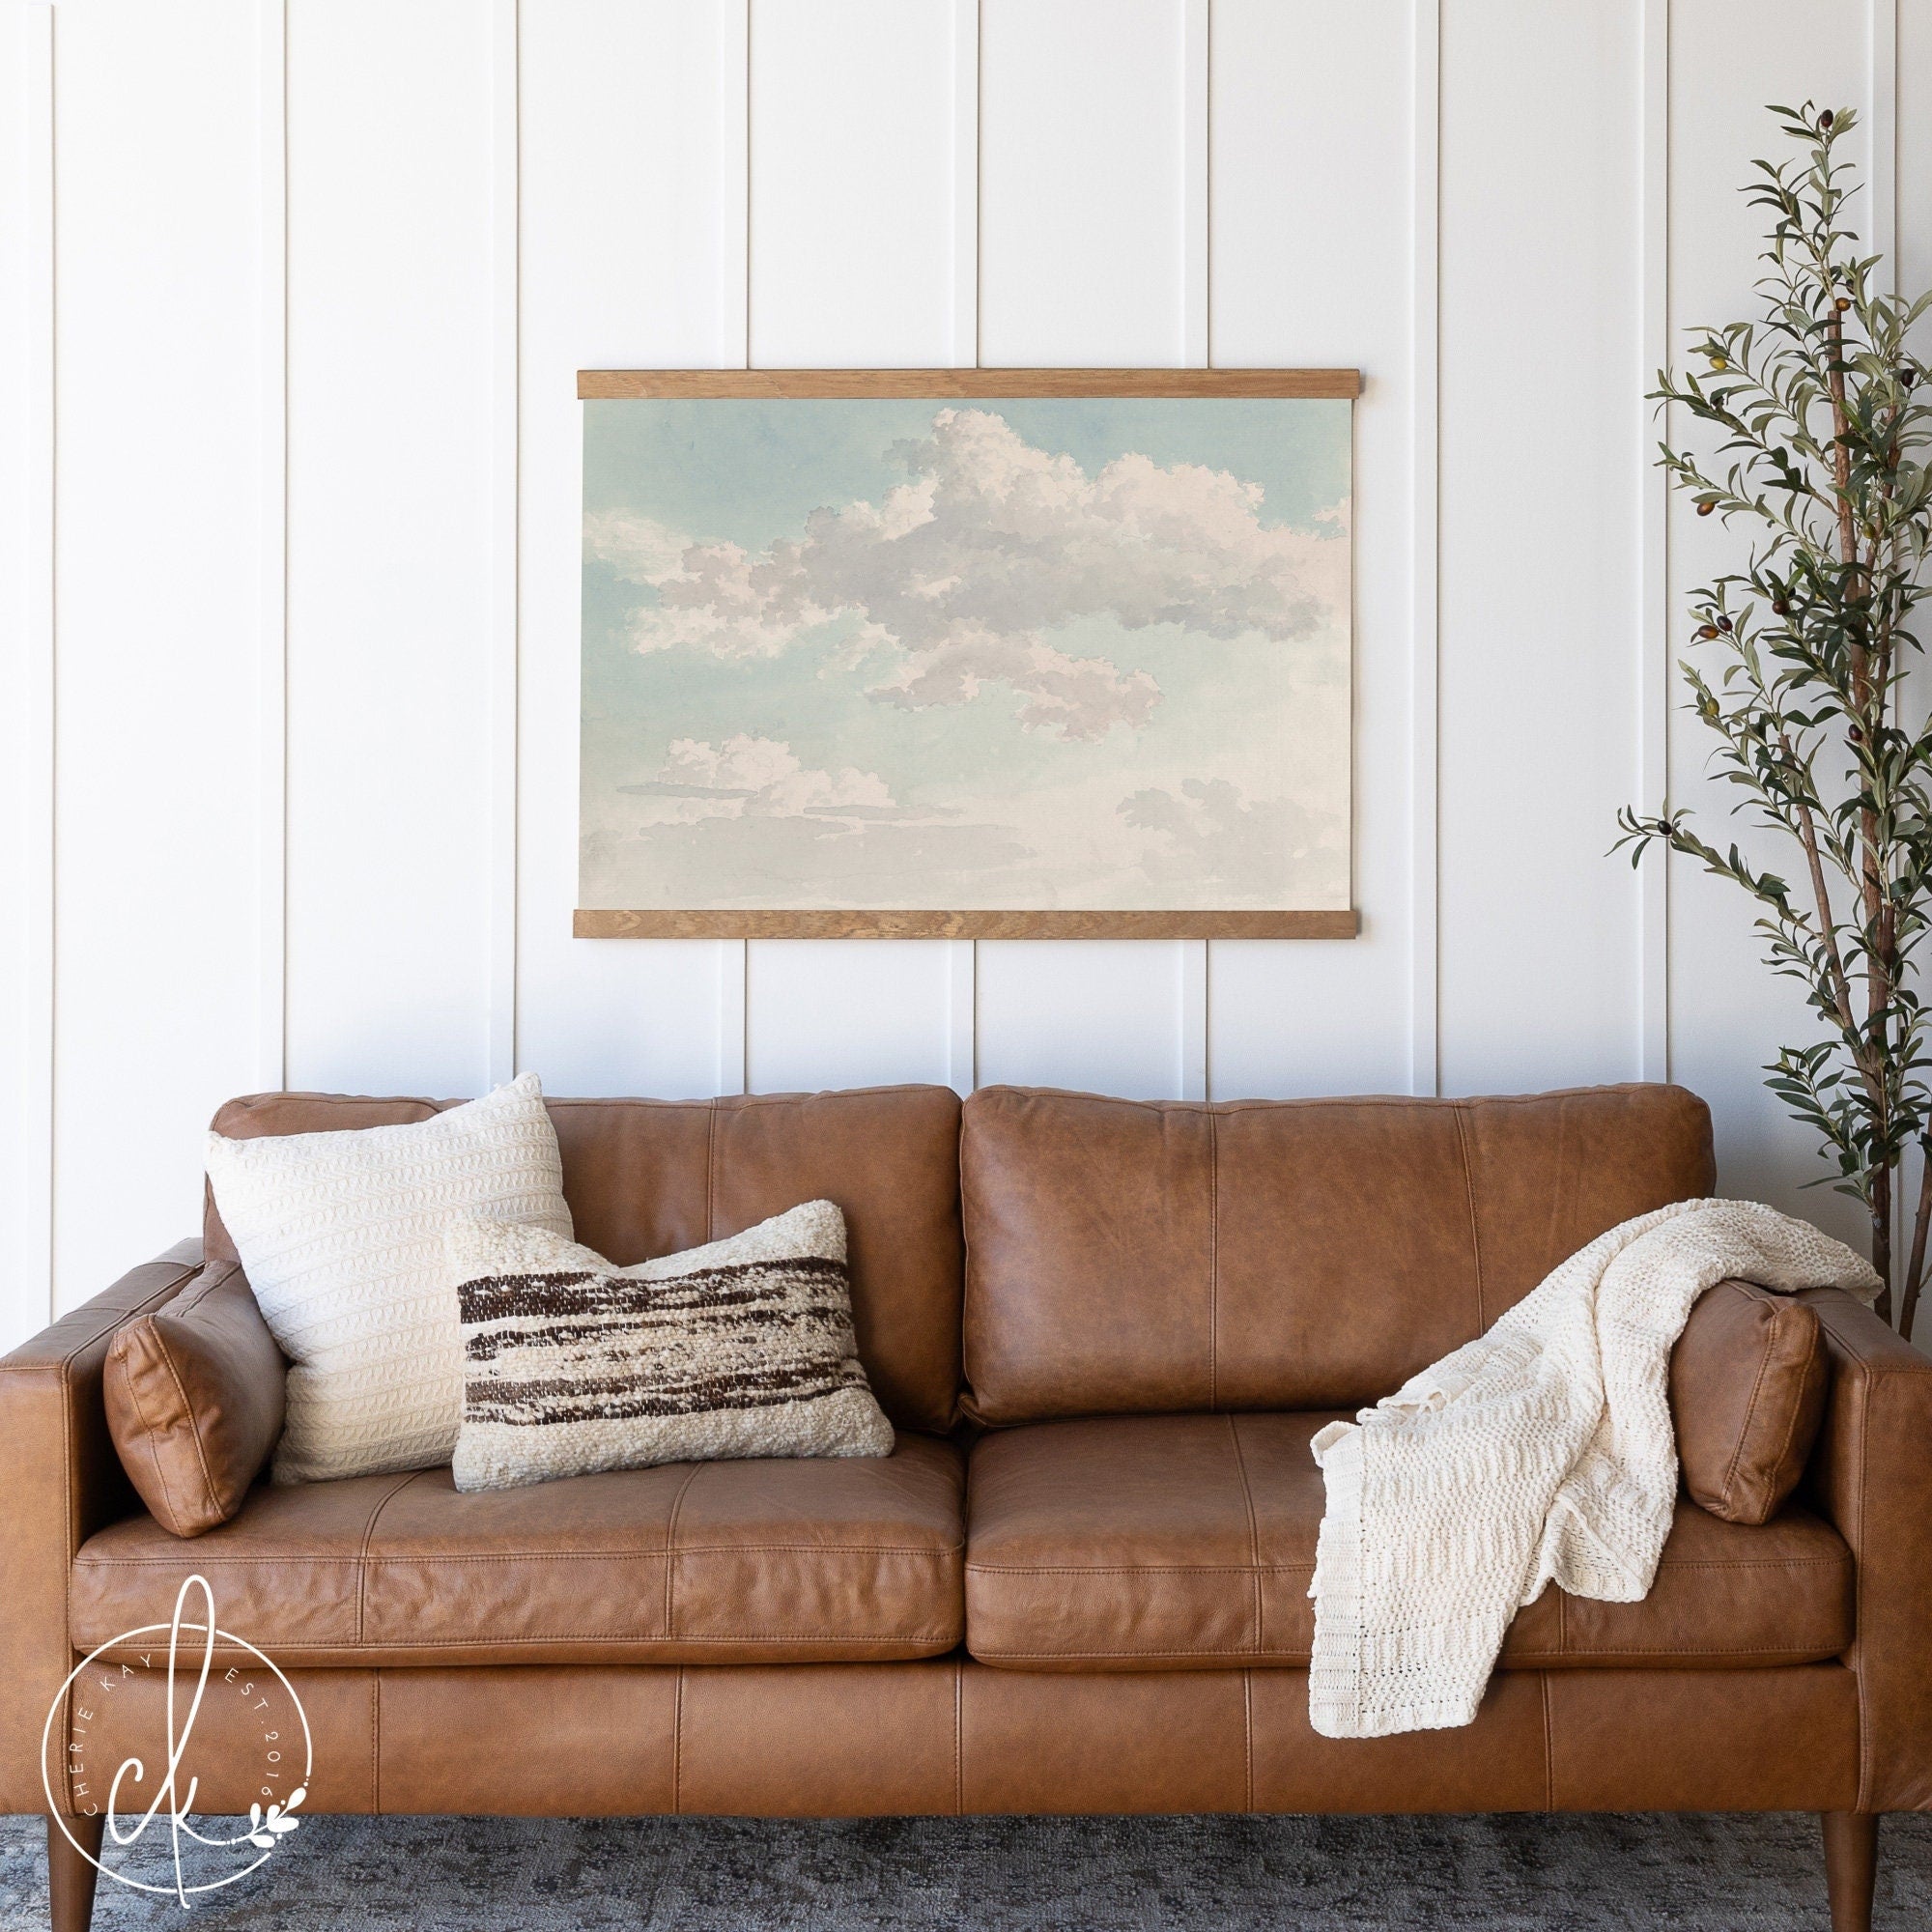 Cloud Painting Canvas Tapestry | Fabric Wall Hanging | Sky Landscape Painting | Living Room Wall Decor | Cloud Wall Ar